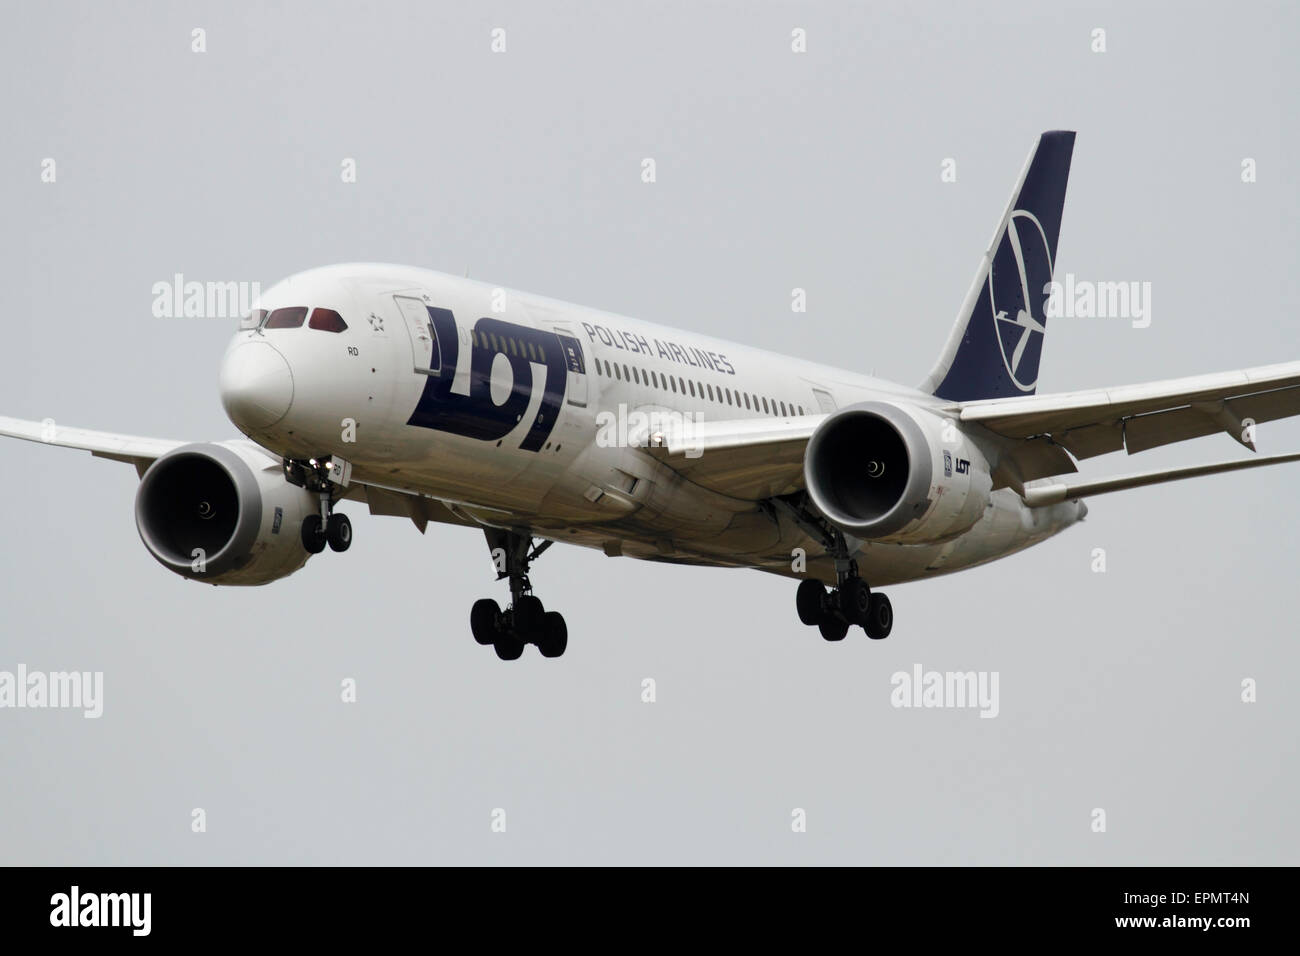 LOT Polish Airlines Boeing 787 Dreamliner on approach Stock Photo